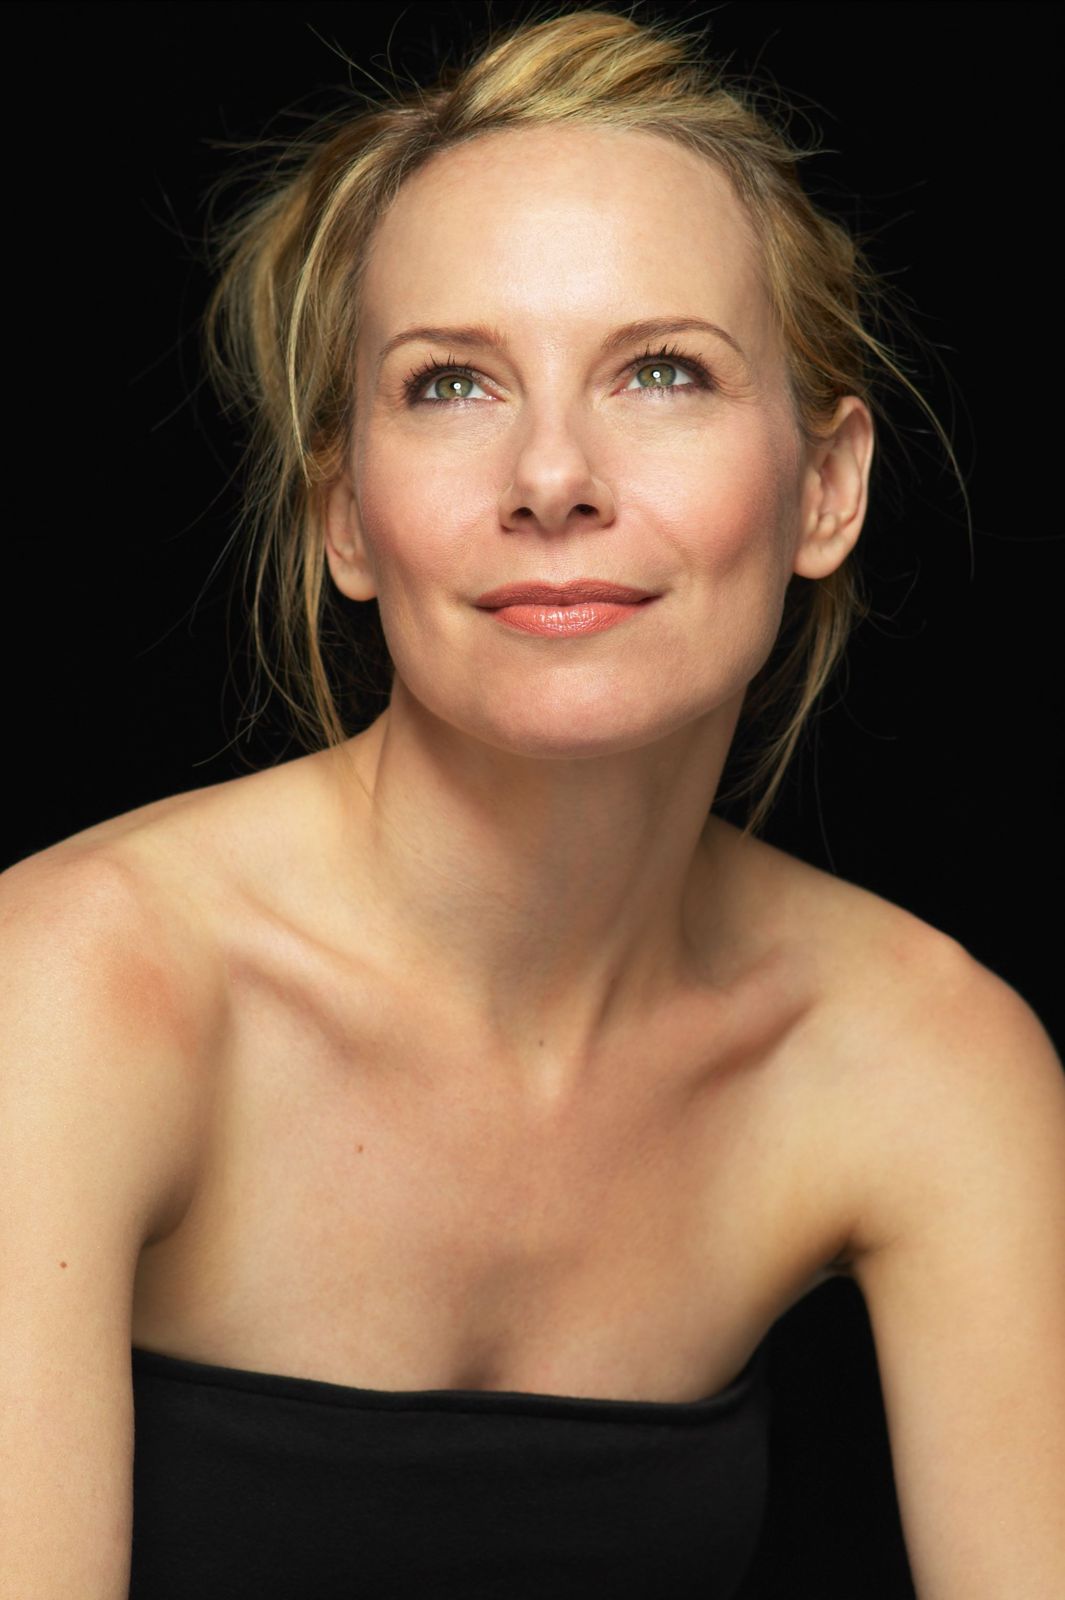 Amy Ryan bags lead role in Central Intelligence